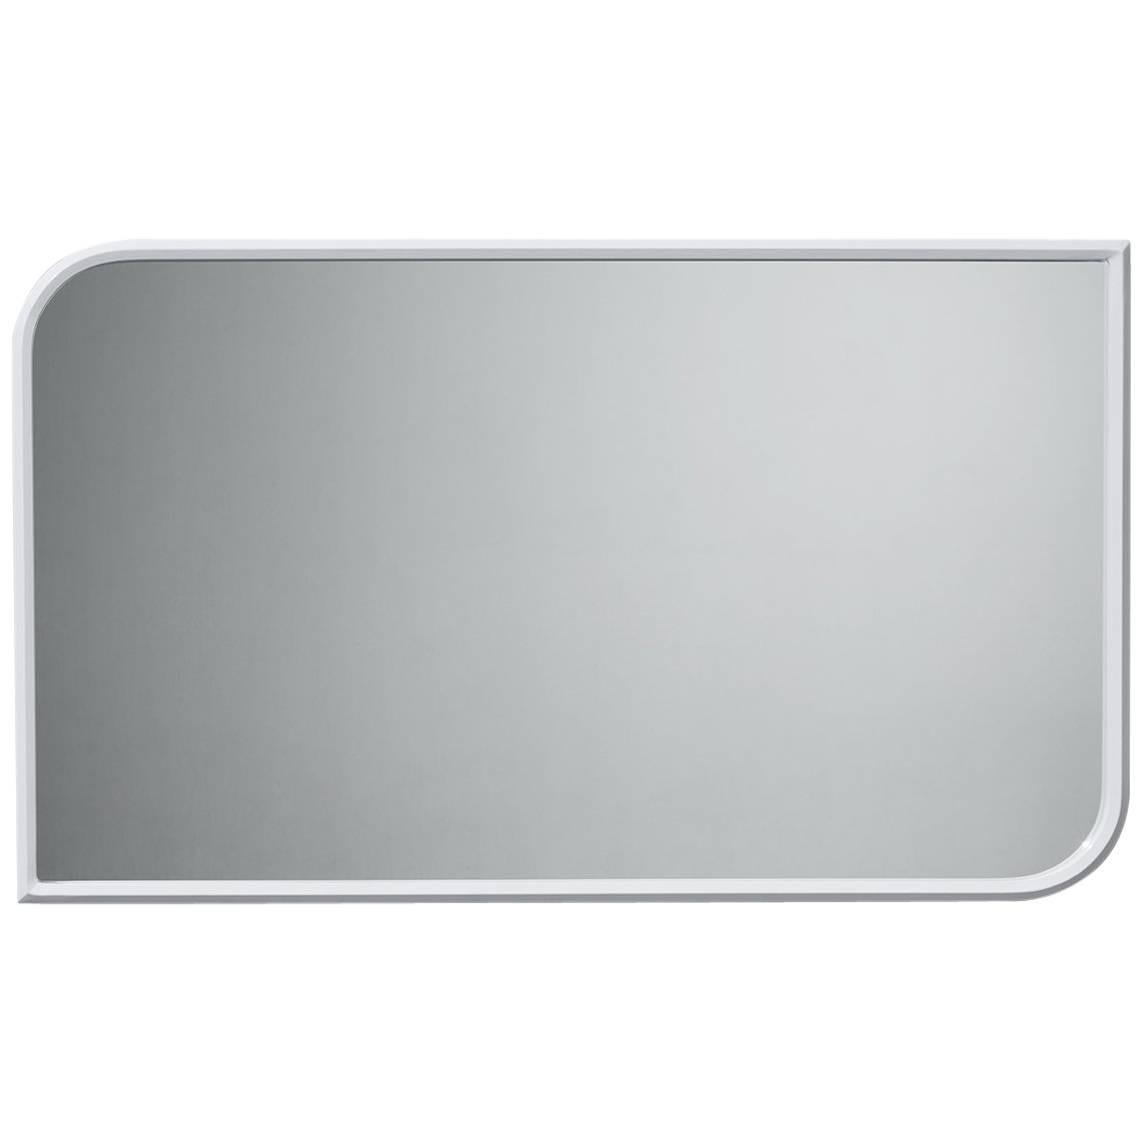 Double Curve Mirror in Powder-Coated Steel 2016 by Post & Gleam For Sale